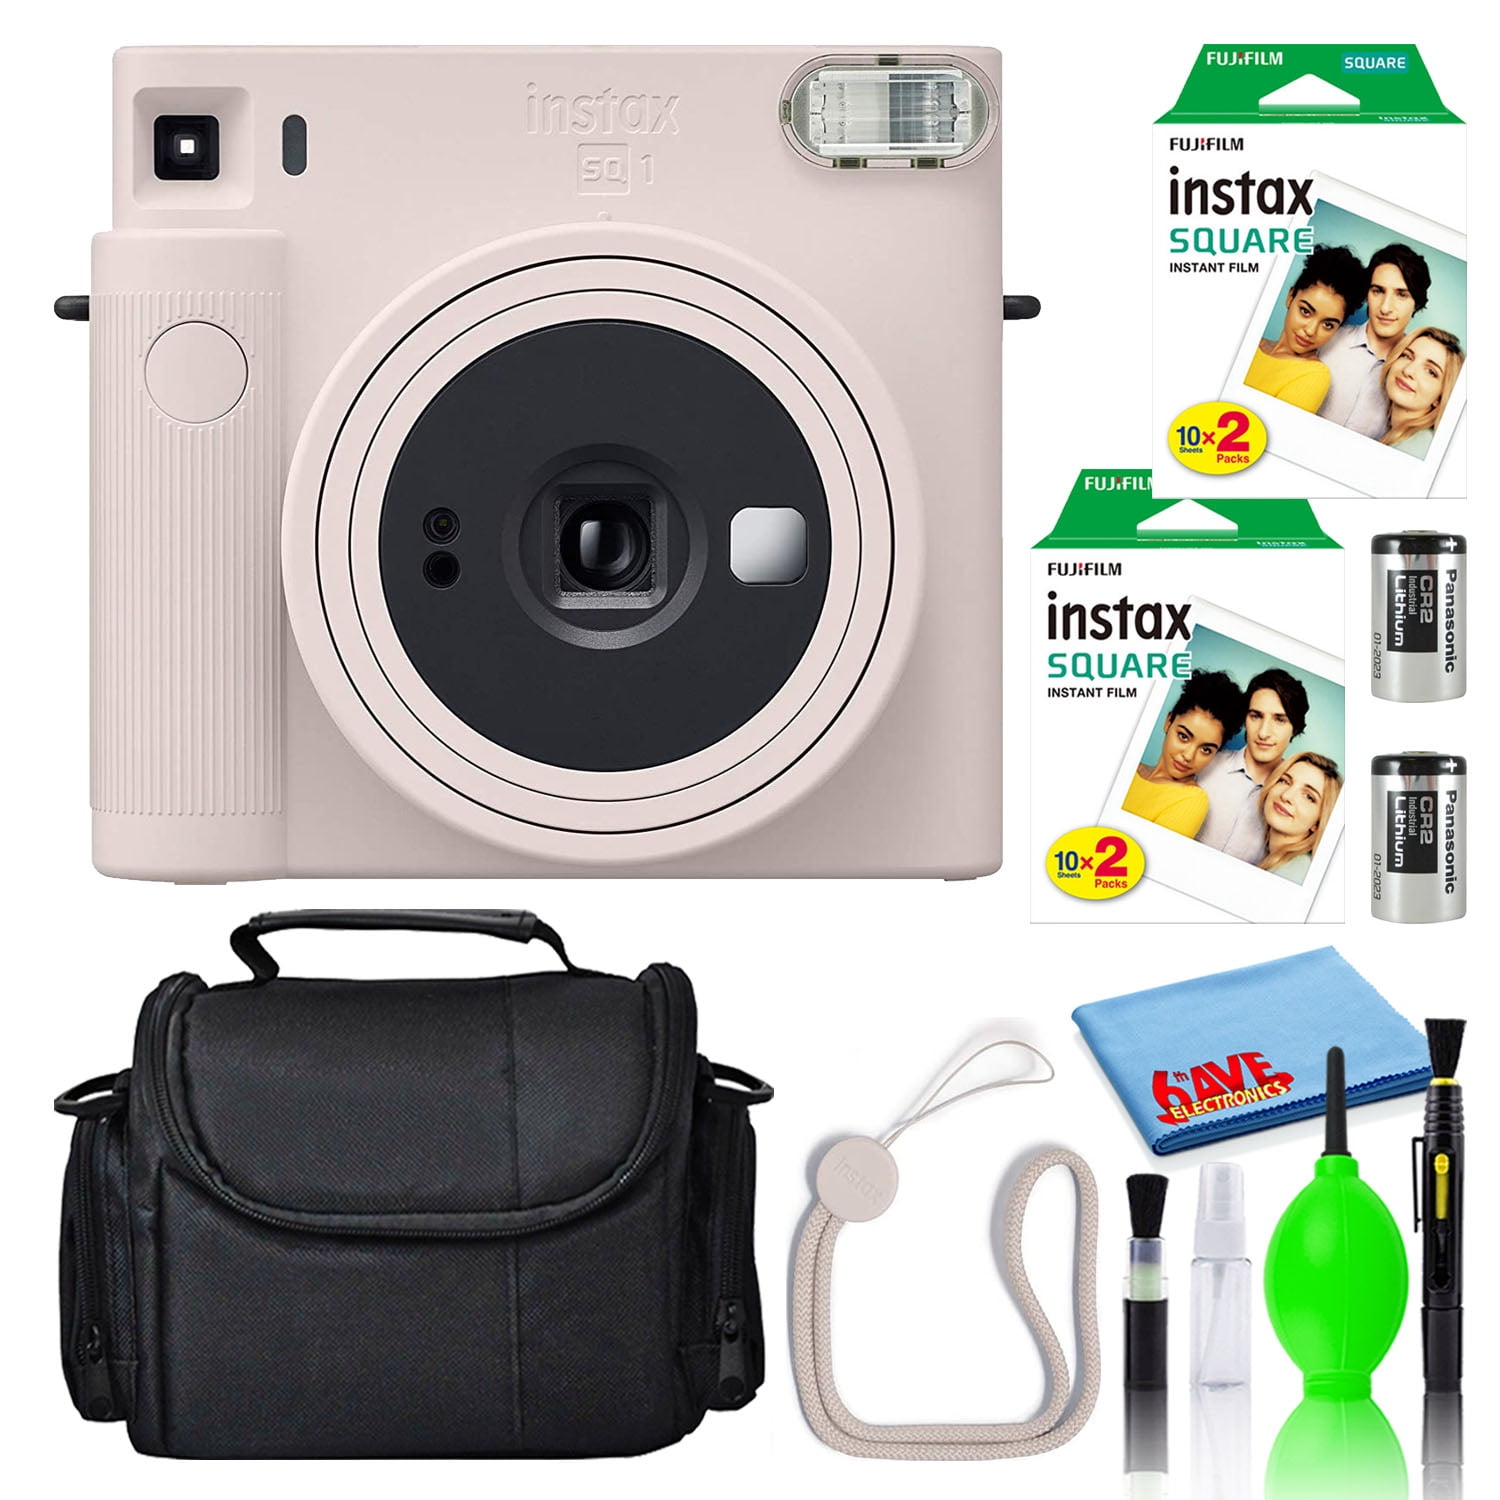 Fujifilm Instax Square SQ1 Instant Film Camera (Chalk Bundle with (2) Fujifilm Instax Square Film Pack (White, 20 Shoots) + Carrying Bag + Camera Cleaning Kit More -